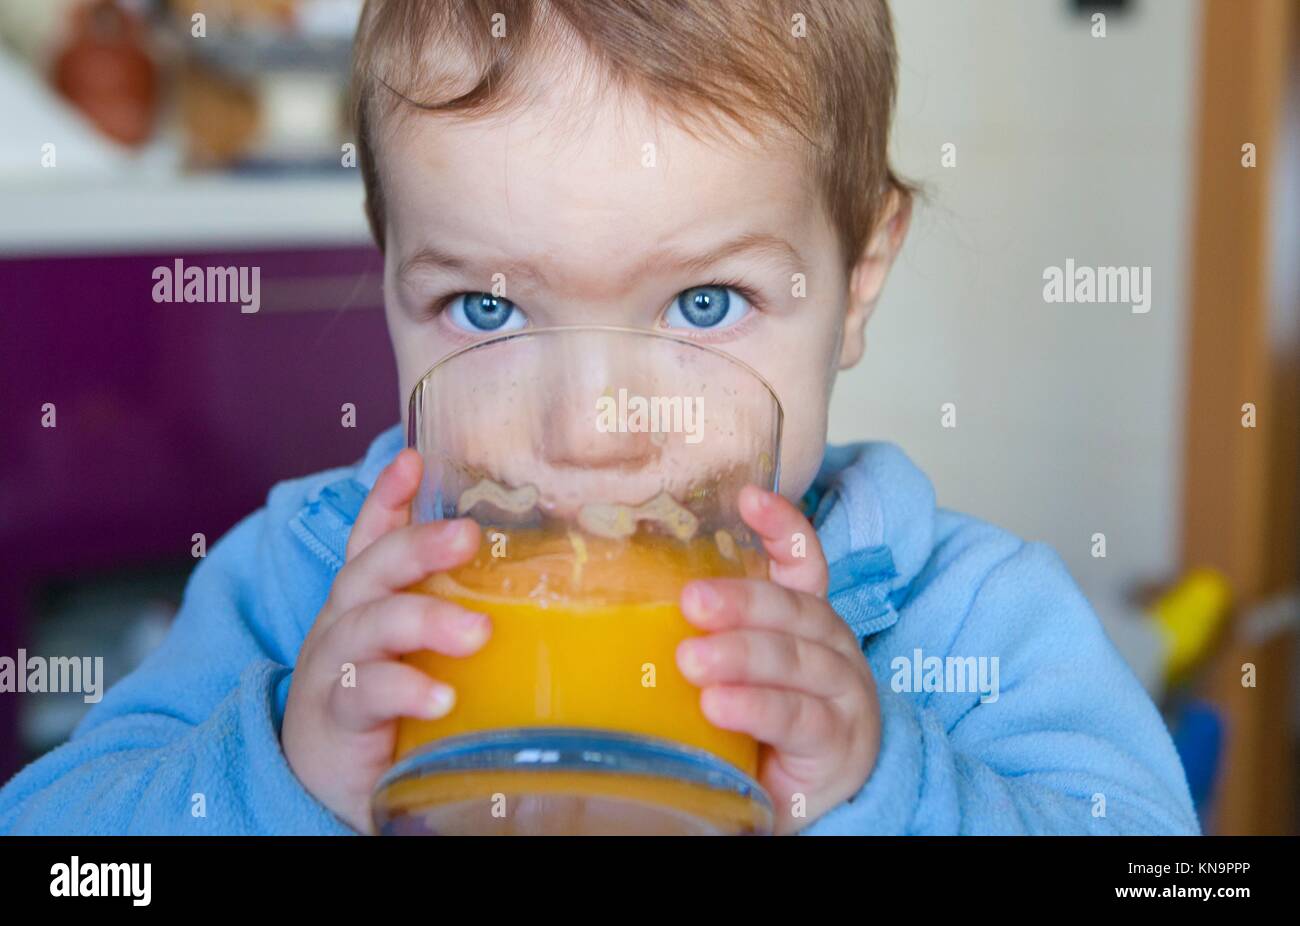 Baby boy drinking a big glass of orange juice fresh made. Education on healthy nutrition for children concept. Stock Photo